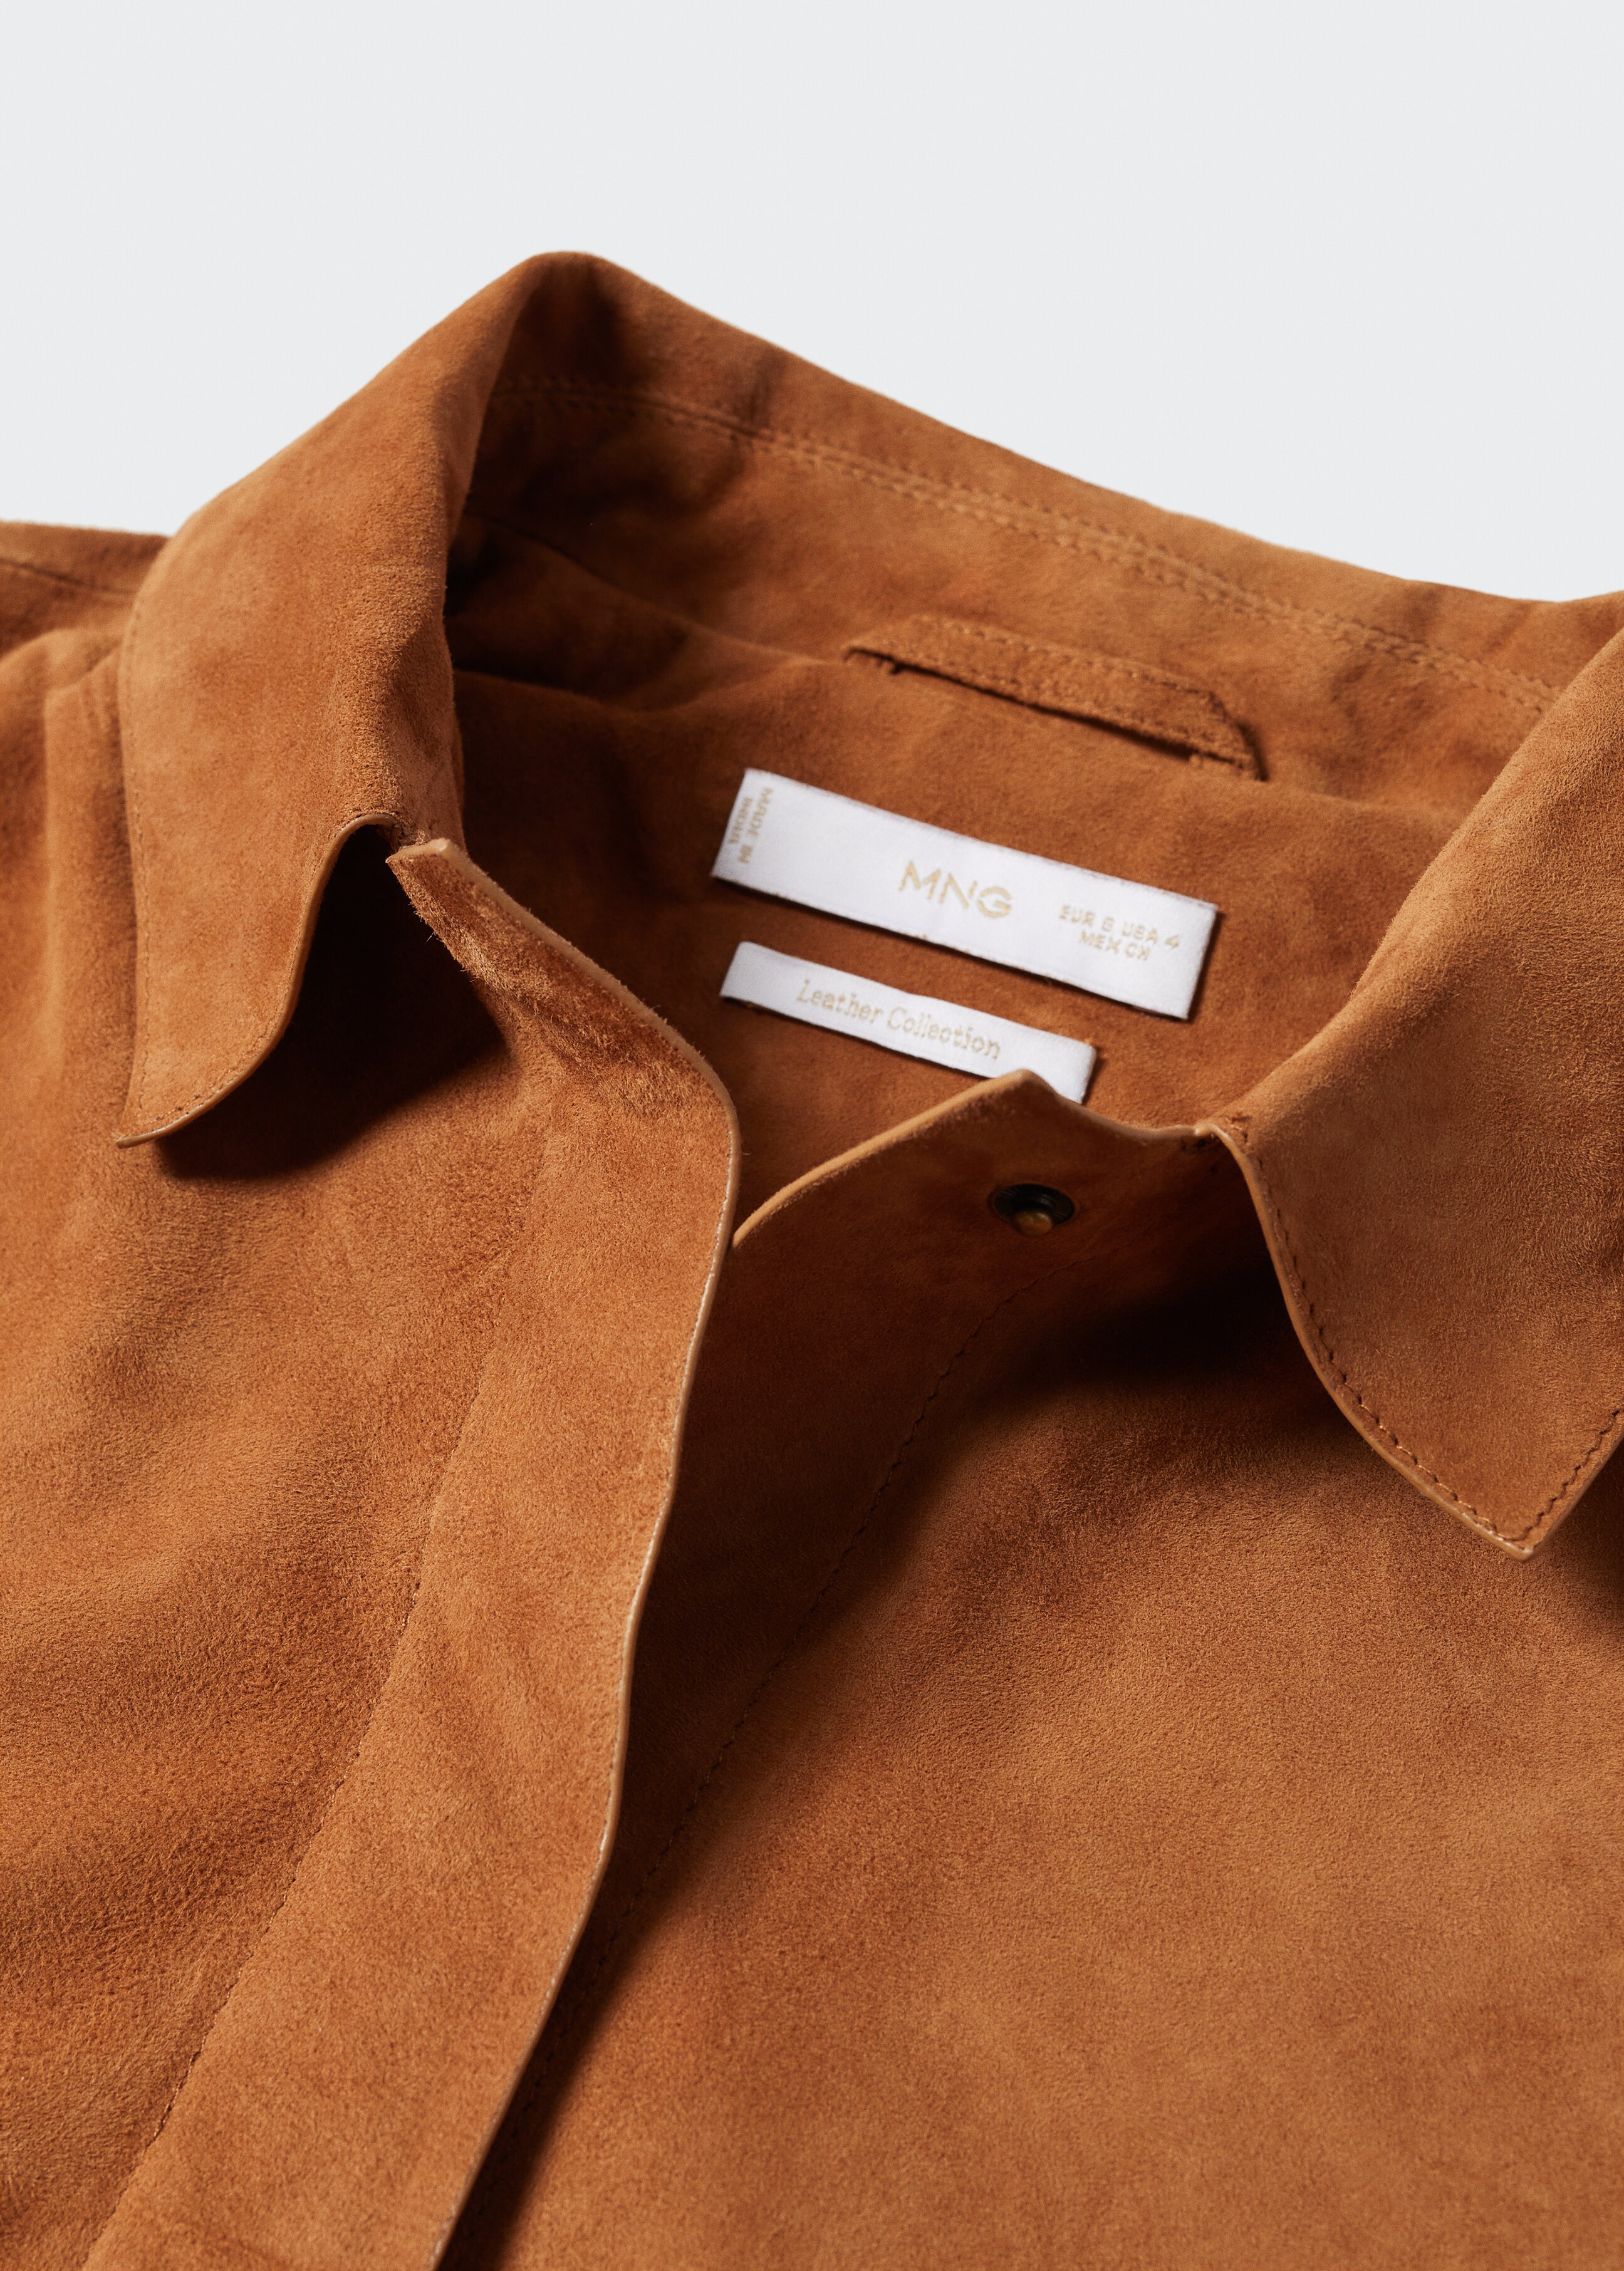 Suede leather shirt - Details of the article 8